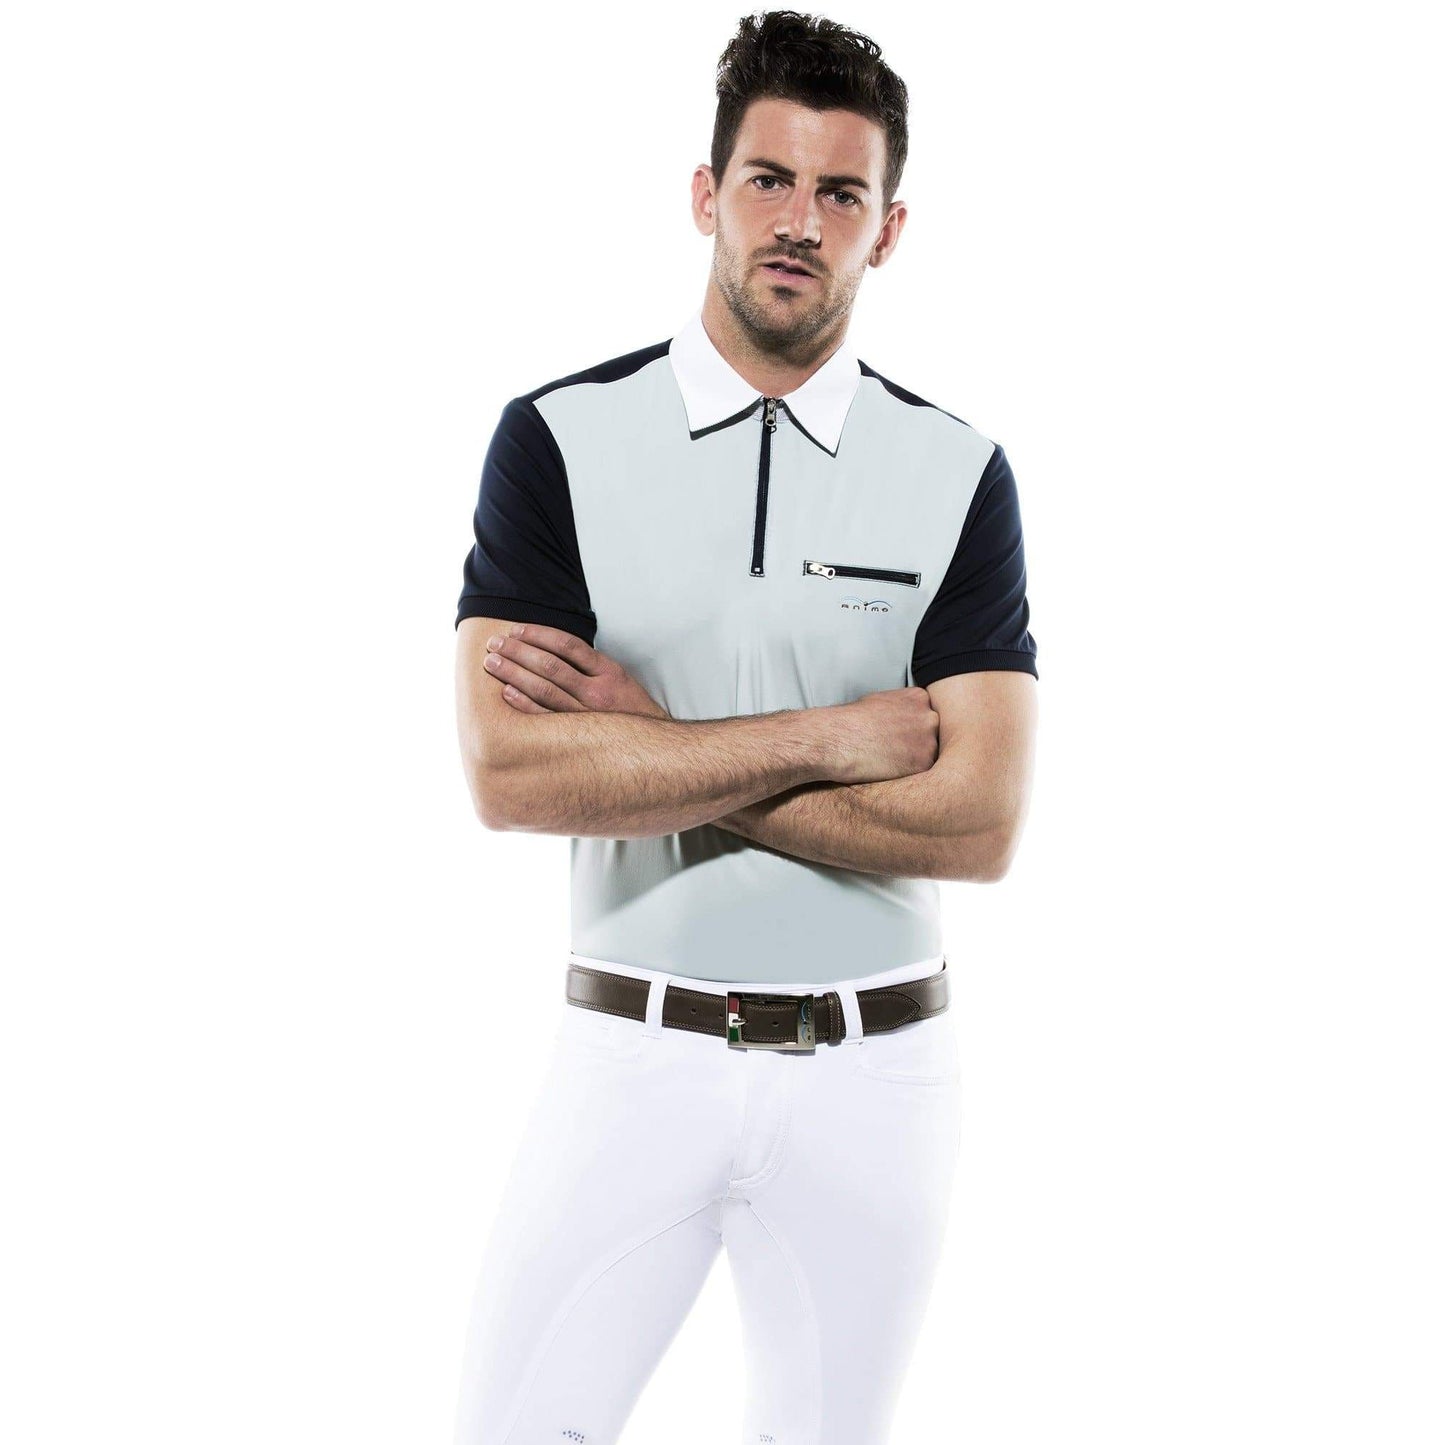 Man in Animo polo shirt, crossed arms, white breeches, confident posture.